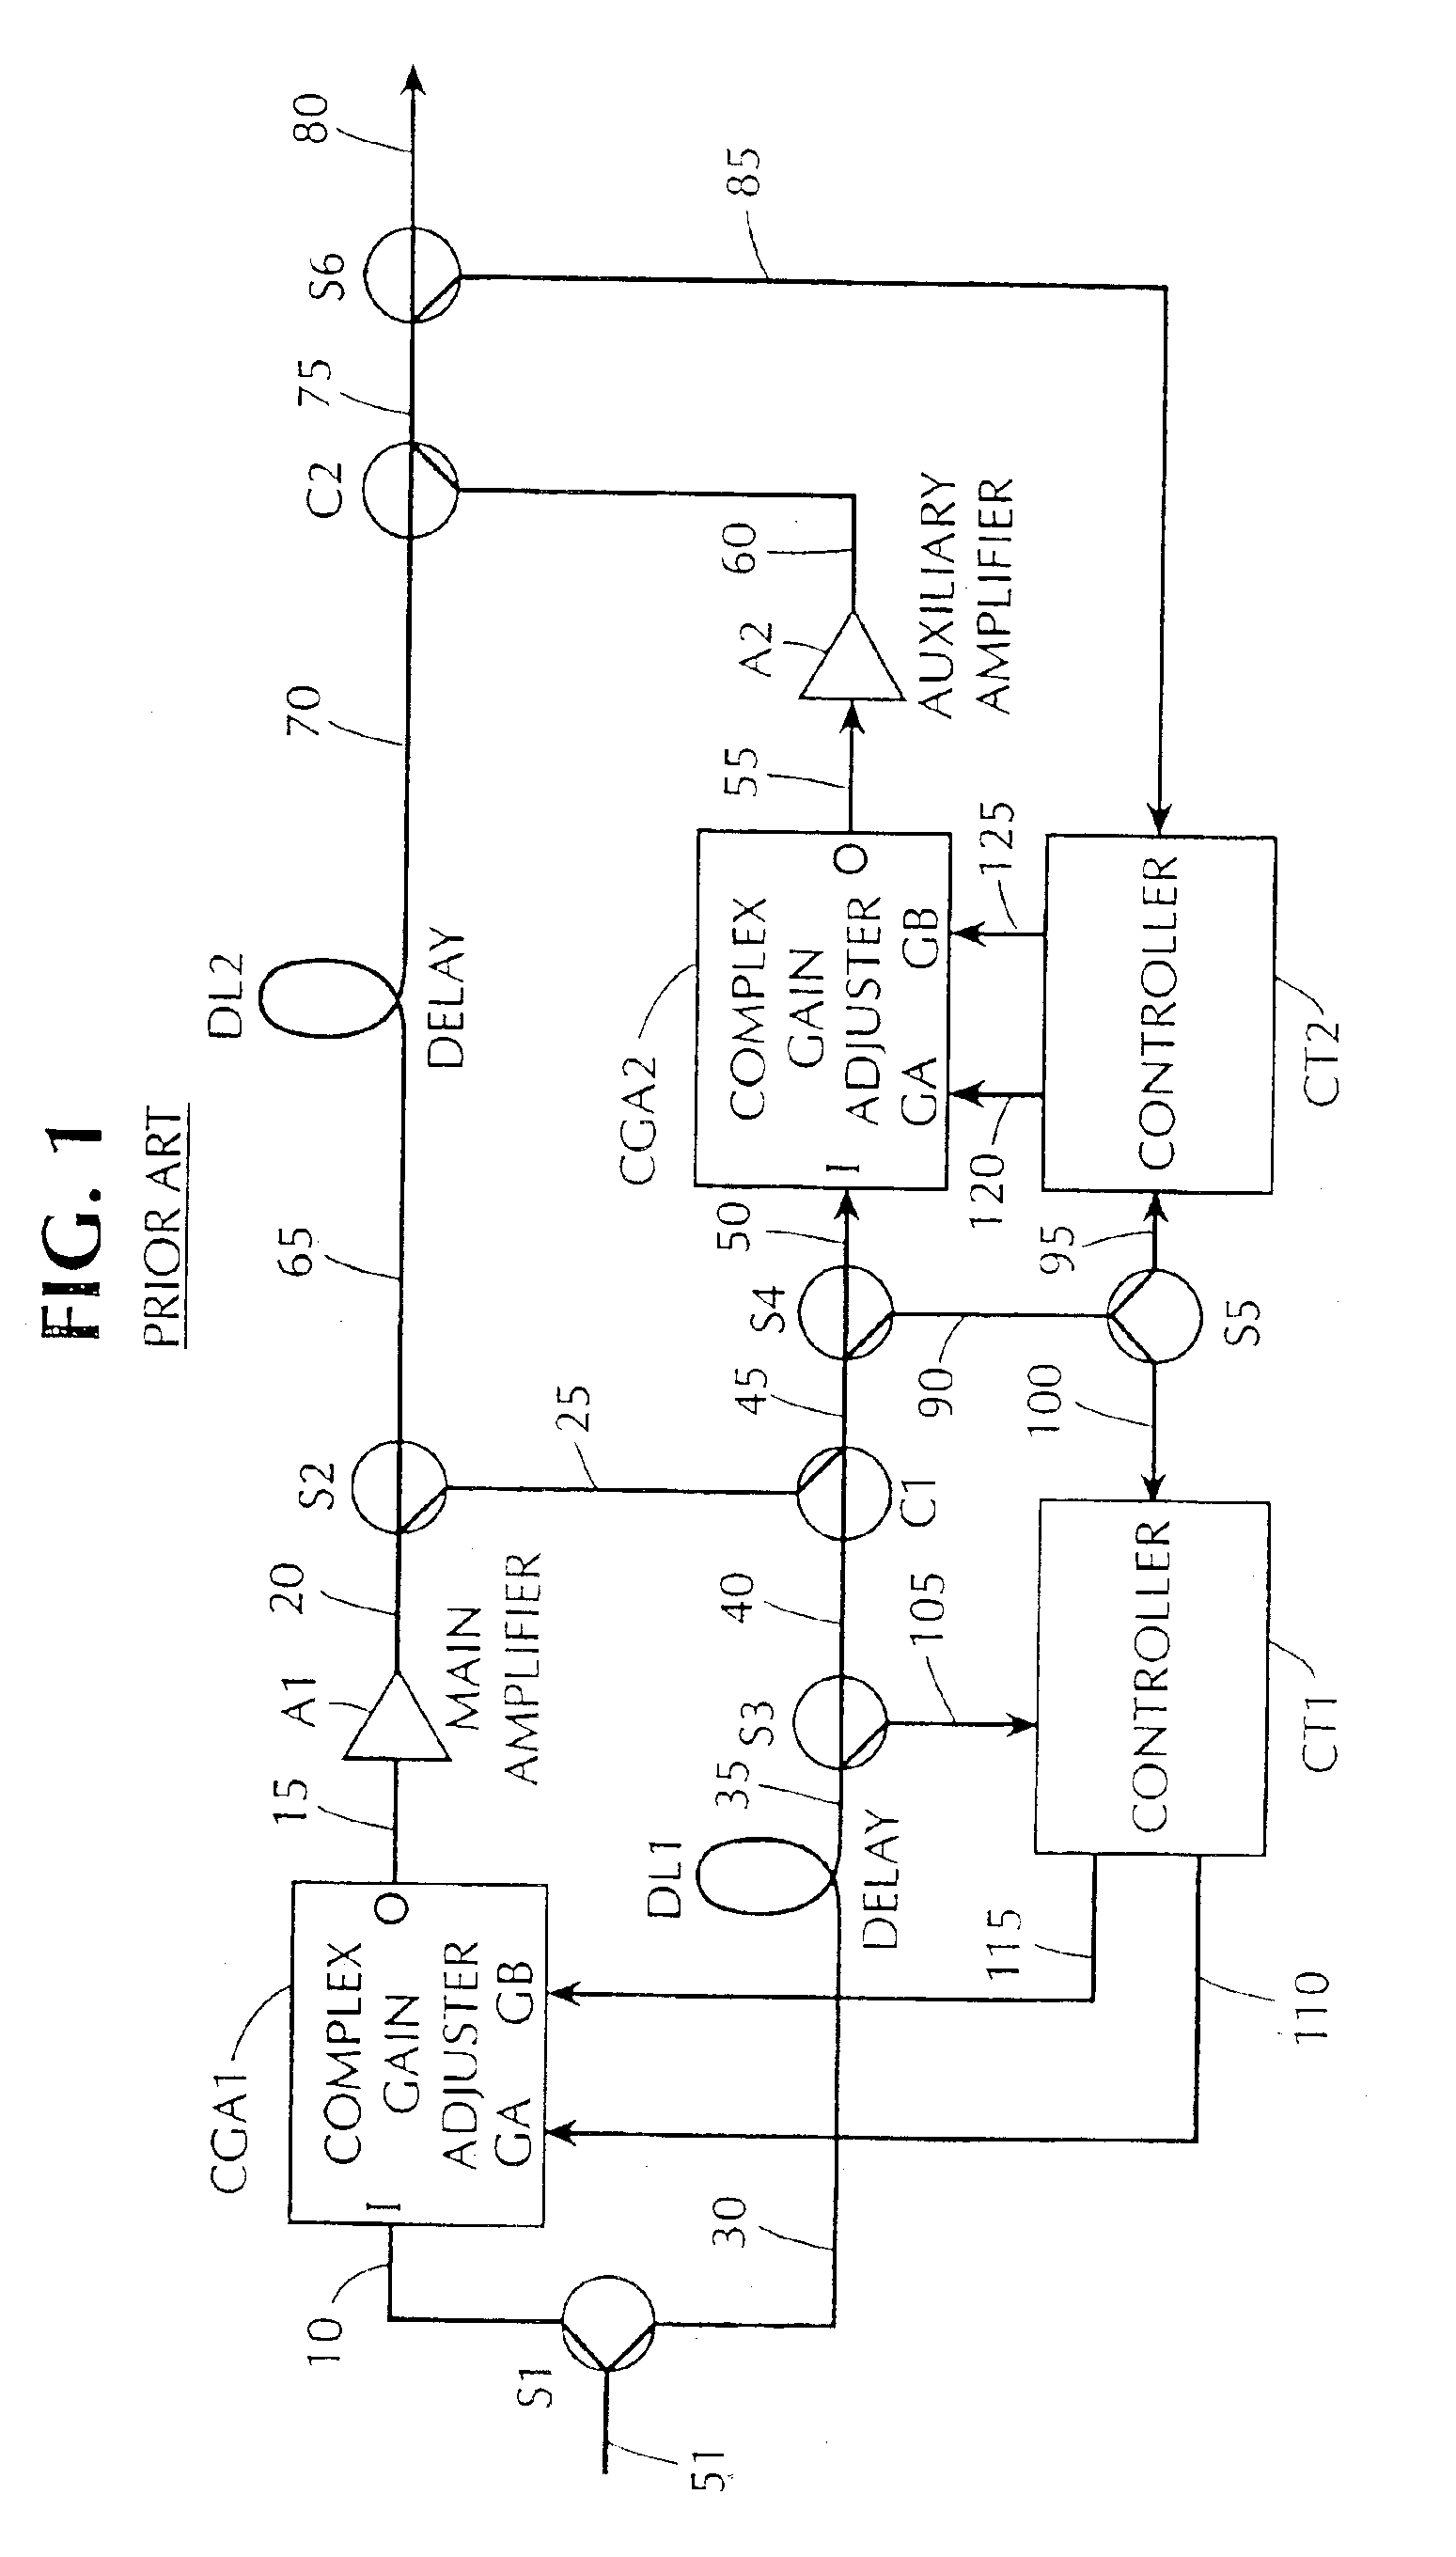 Adaptive linearizer for RF power amplifiers